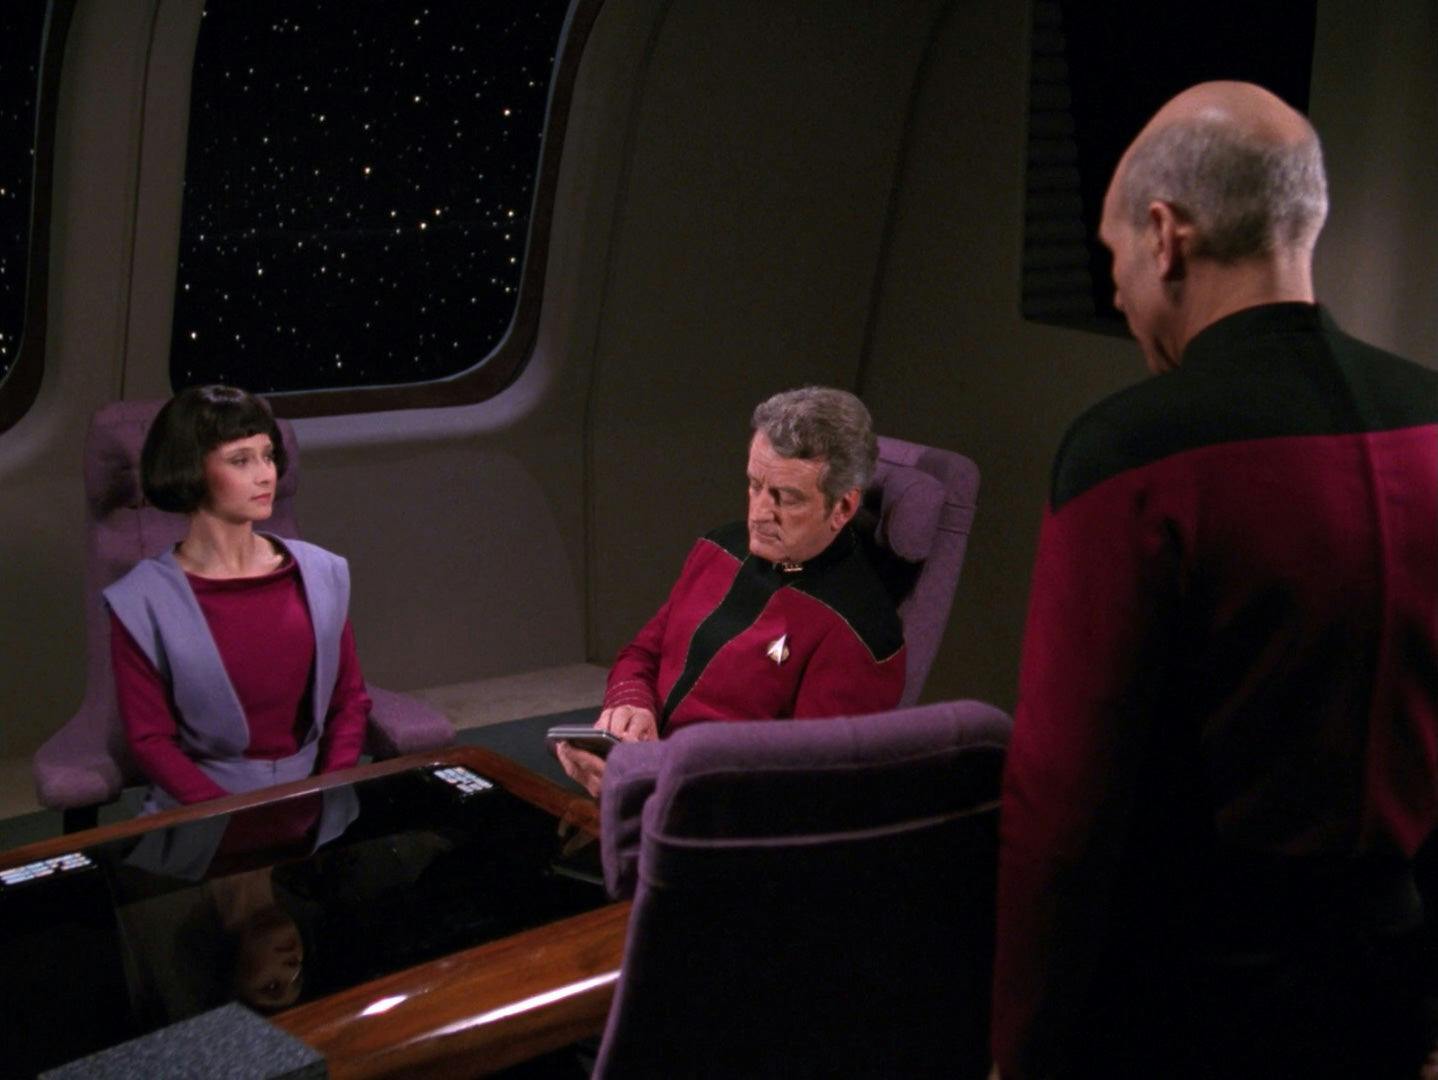 Lal (Hallie Todd), Vice Admiral Anthony Haftel (Nicolas Coster), and Captain Picard in the Observation Deck on Star Trek: The Next Generation “The Offspring”